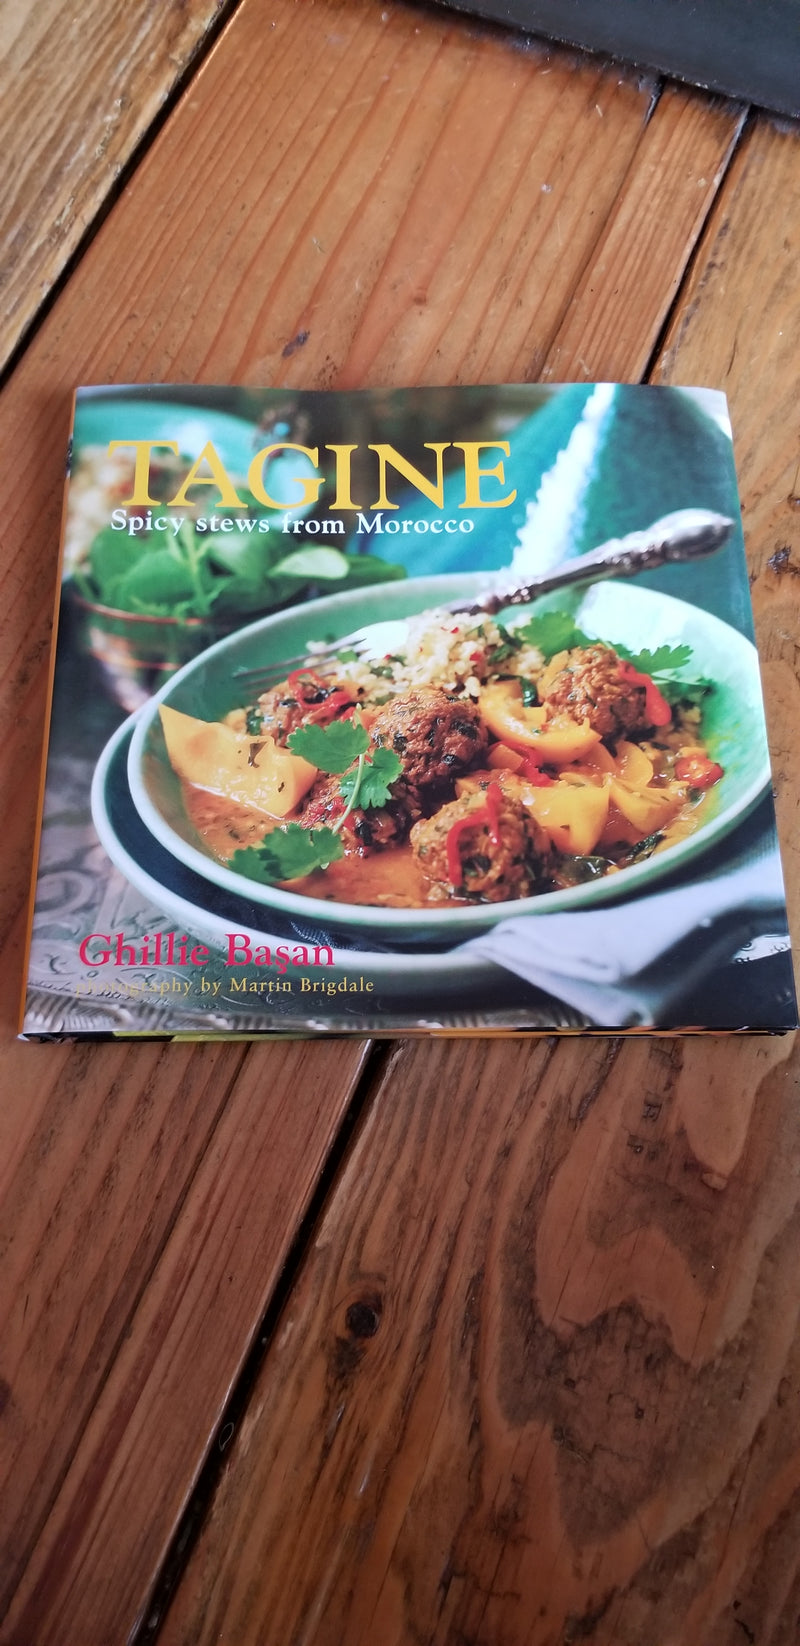 Book tagine from Morocco